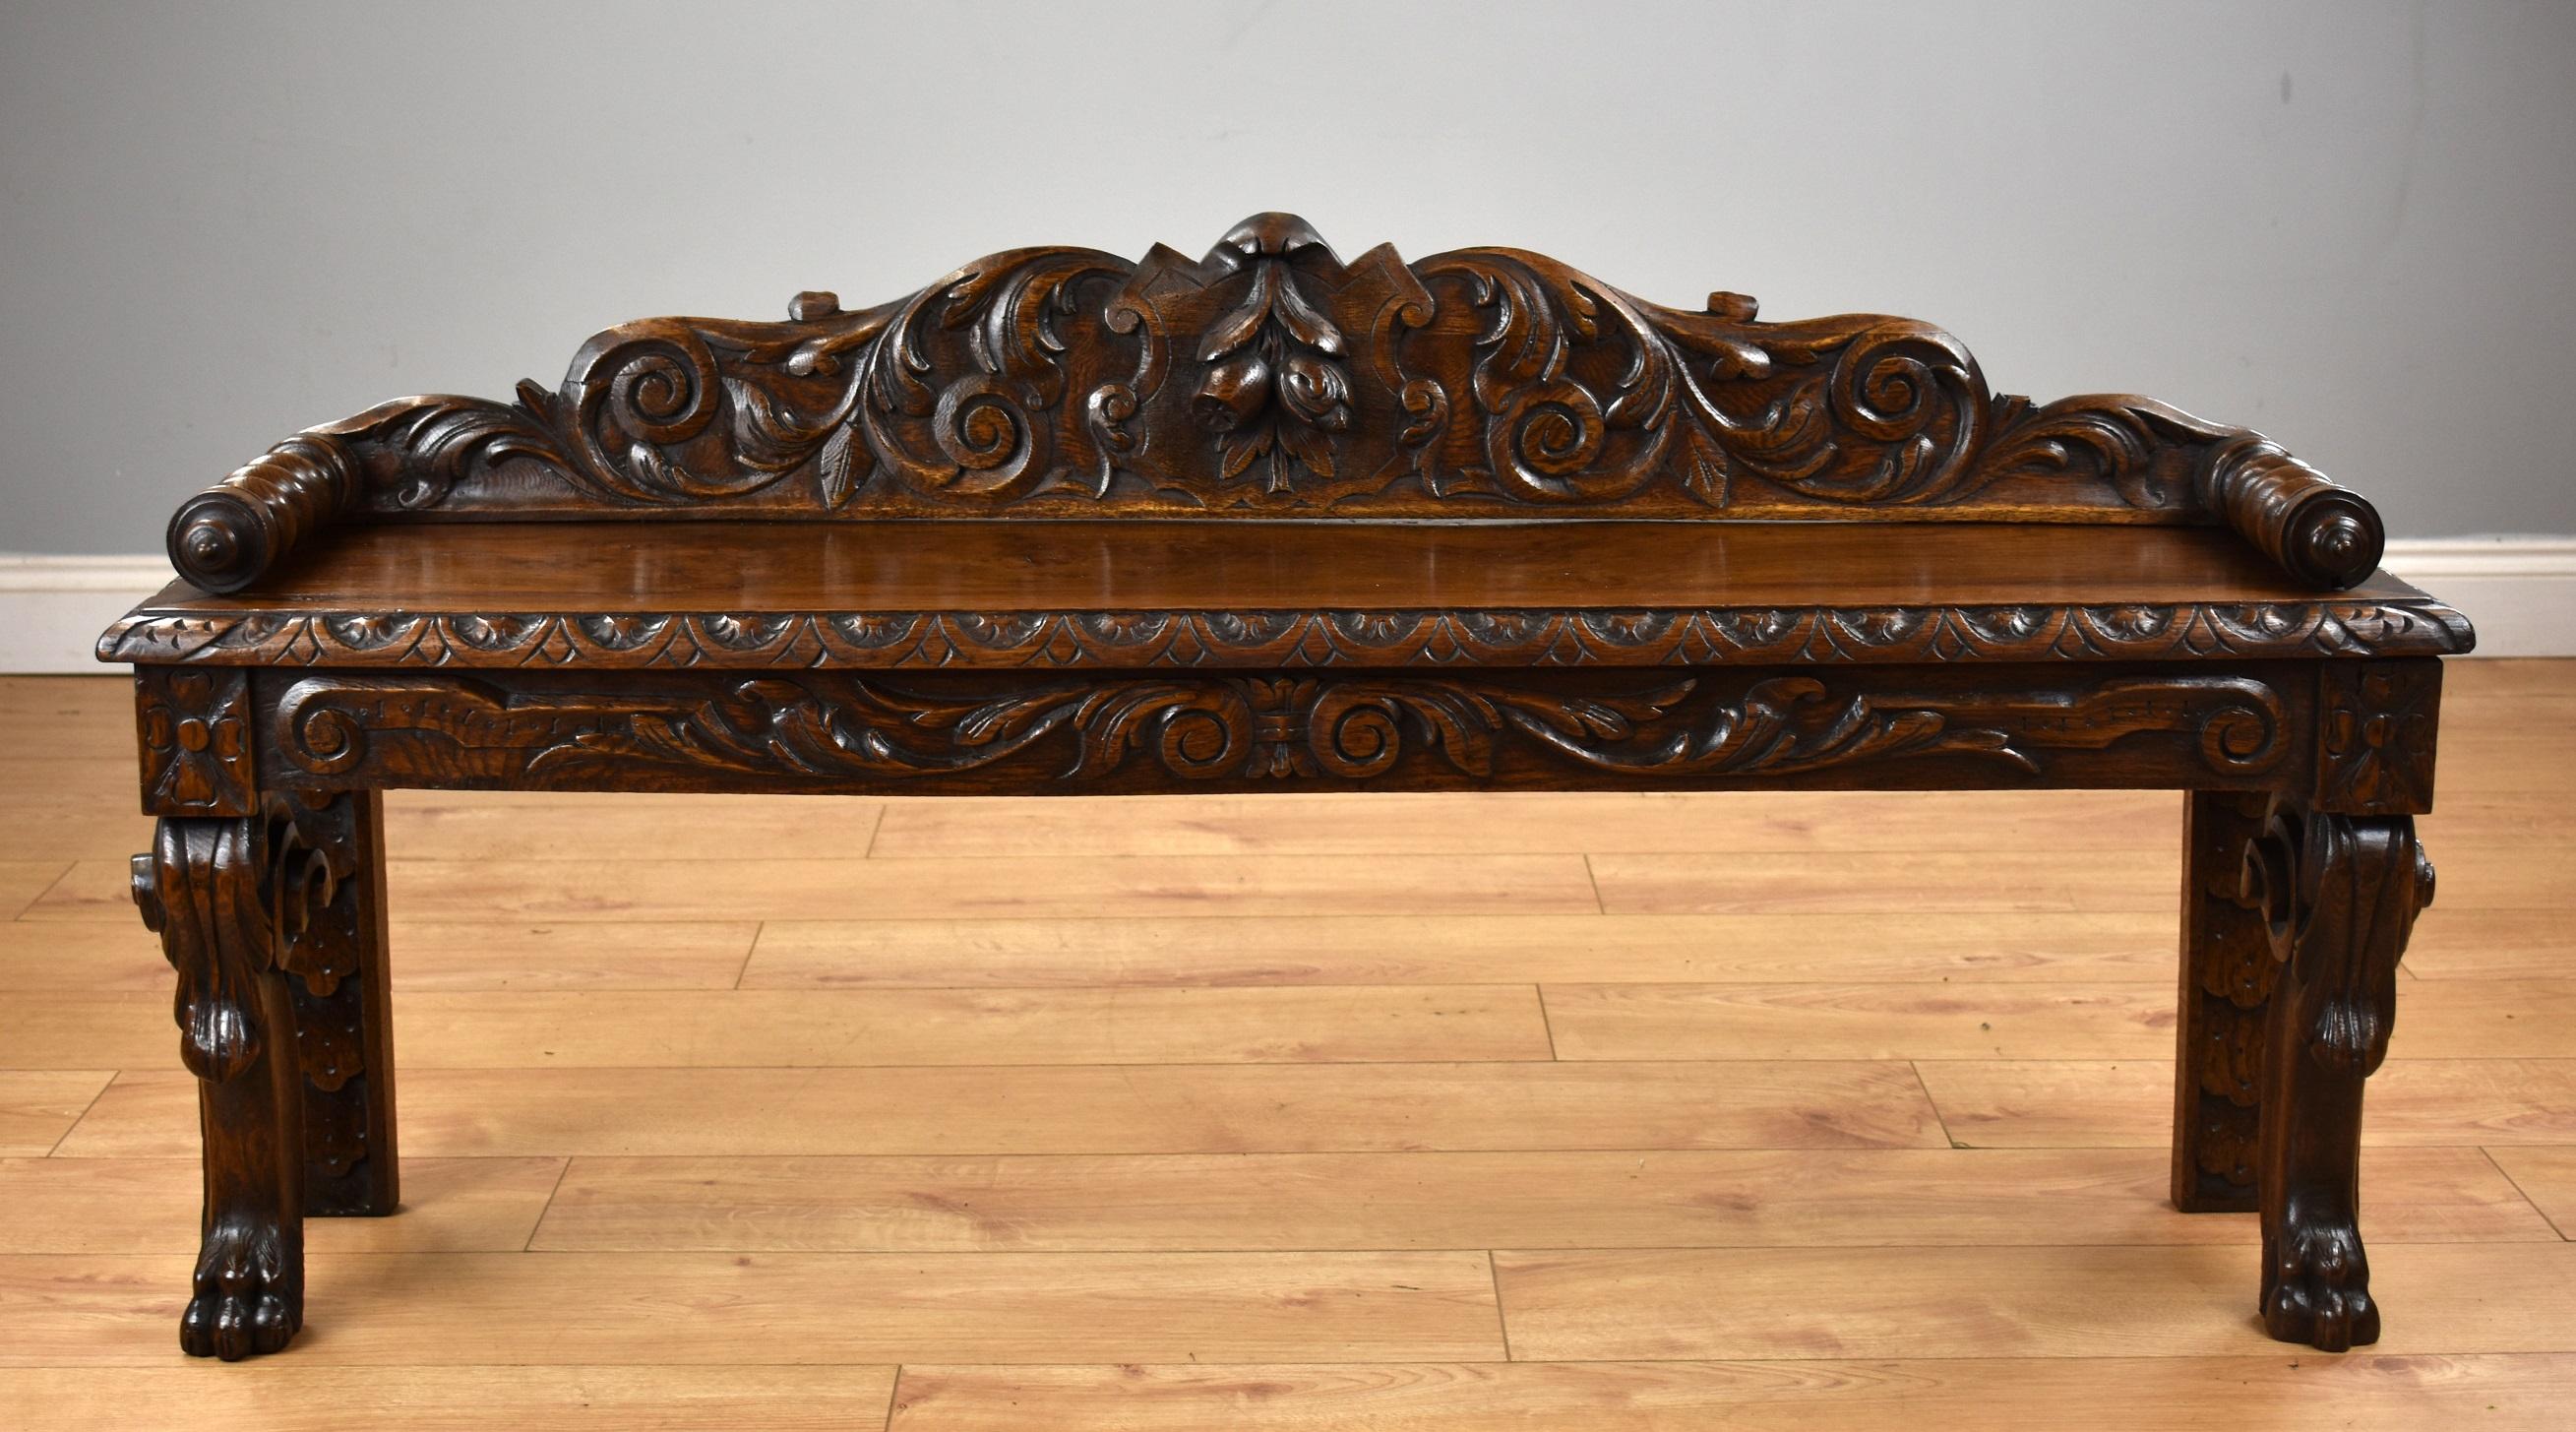 Victorian carved oak window seat in good condition having been recently polished by hand. The seat has a profusely carved back with turned arms, with a detailed scrolled edge to the seat standing on carved legs graduating to claw feet.